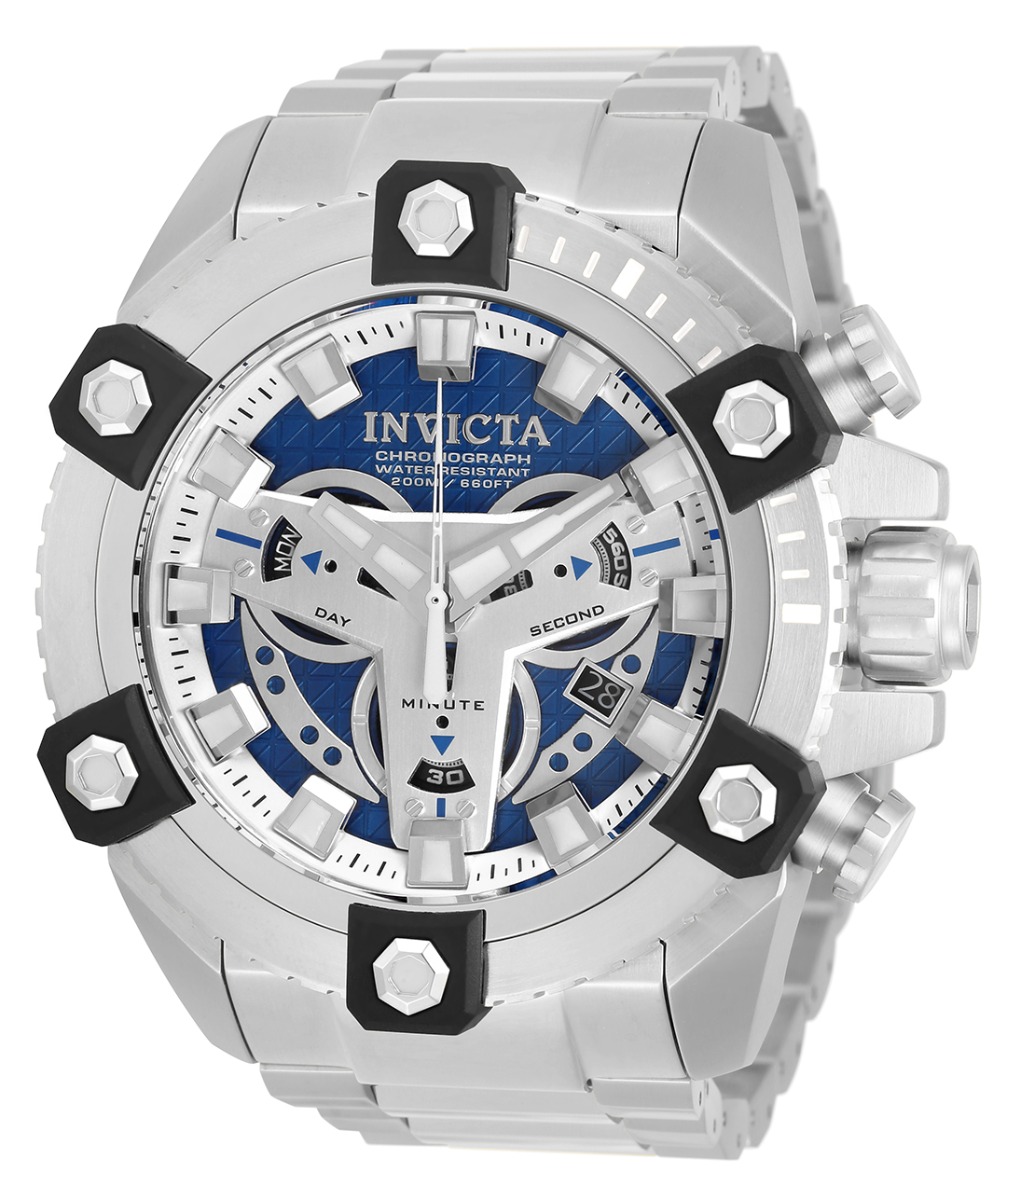 Invicta Coalition Forces Men's Watch - 56mm, Steel (ZG-30904)